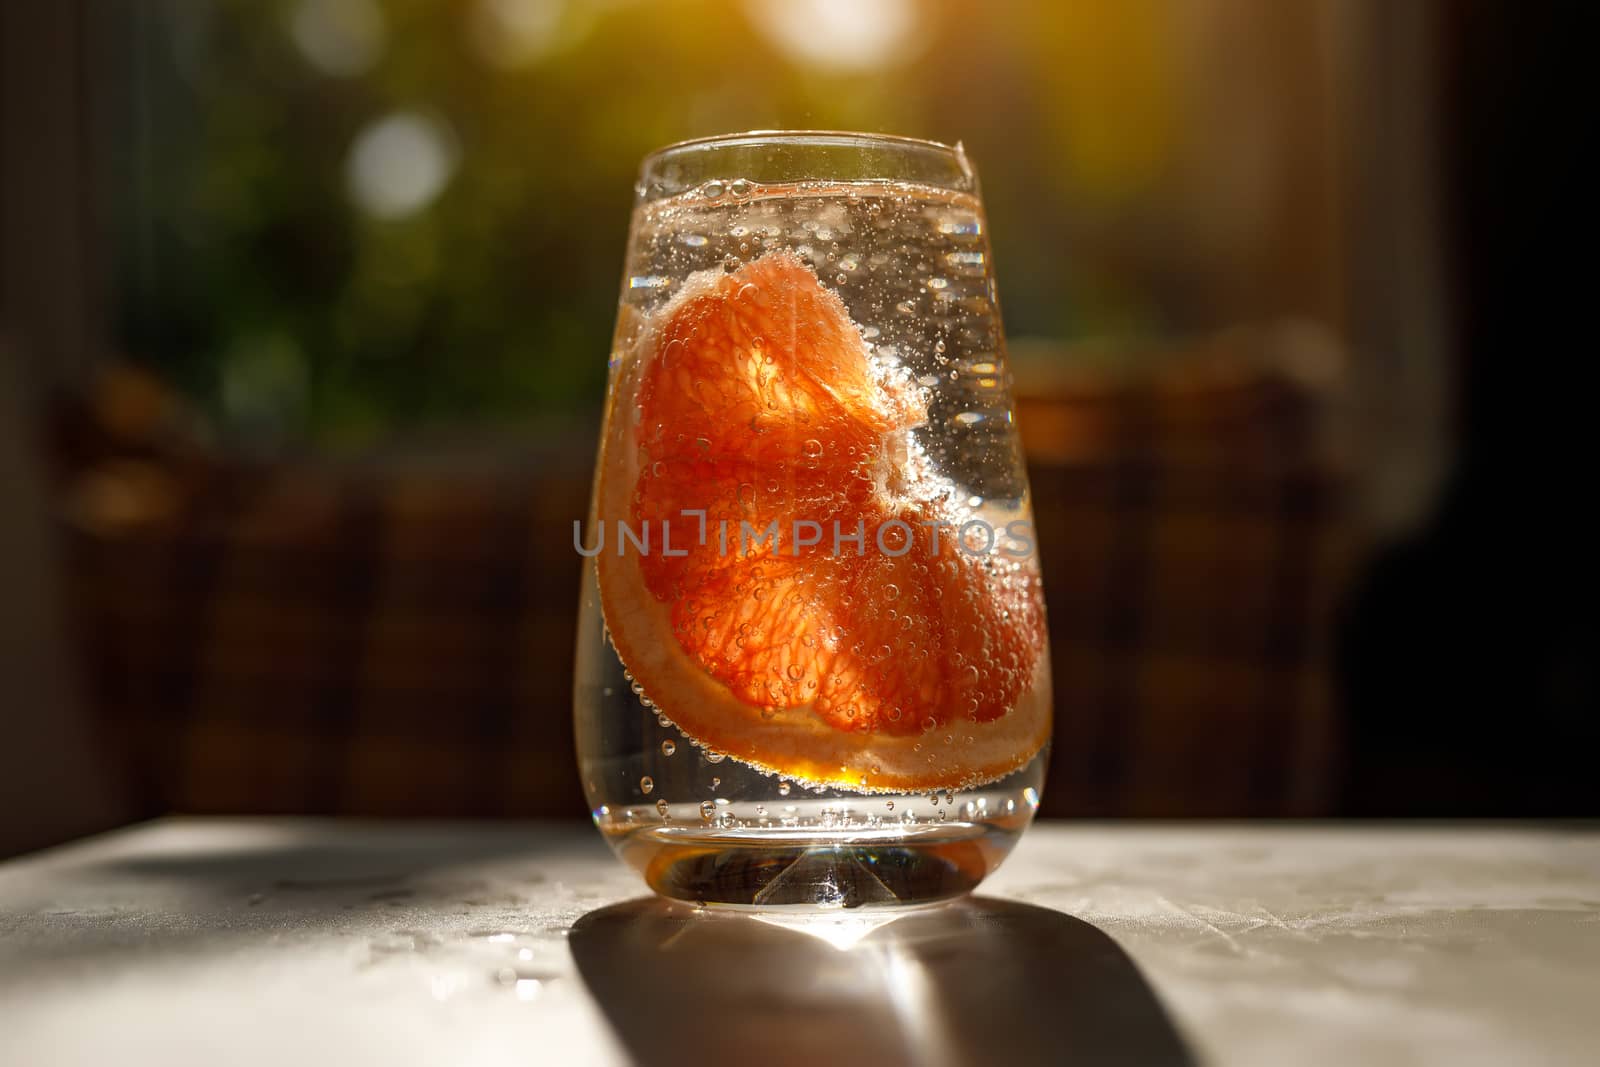 A glass of water with grapefruit